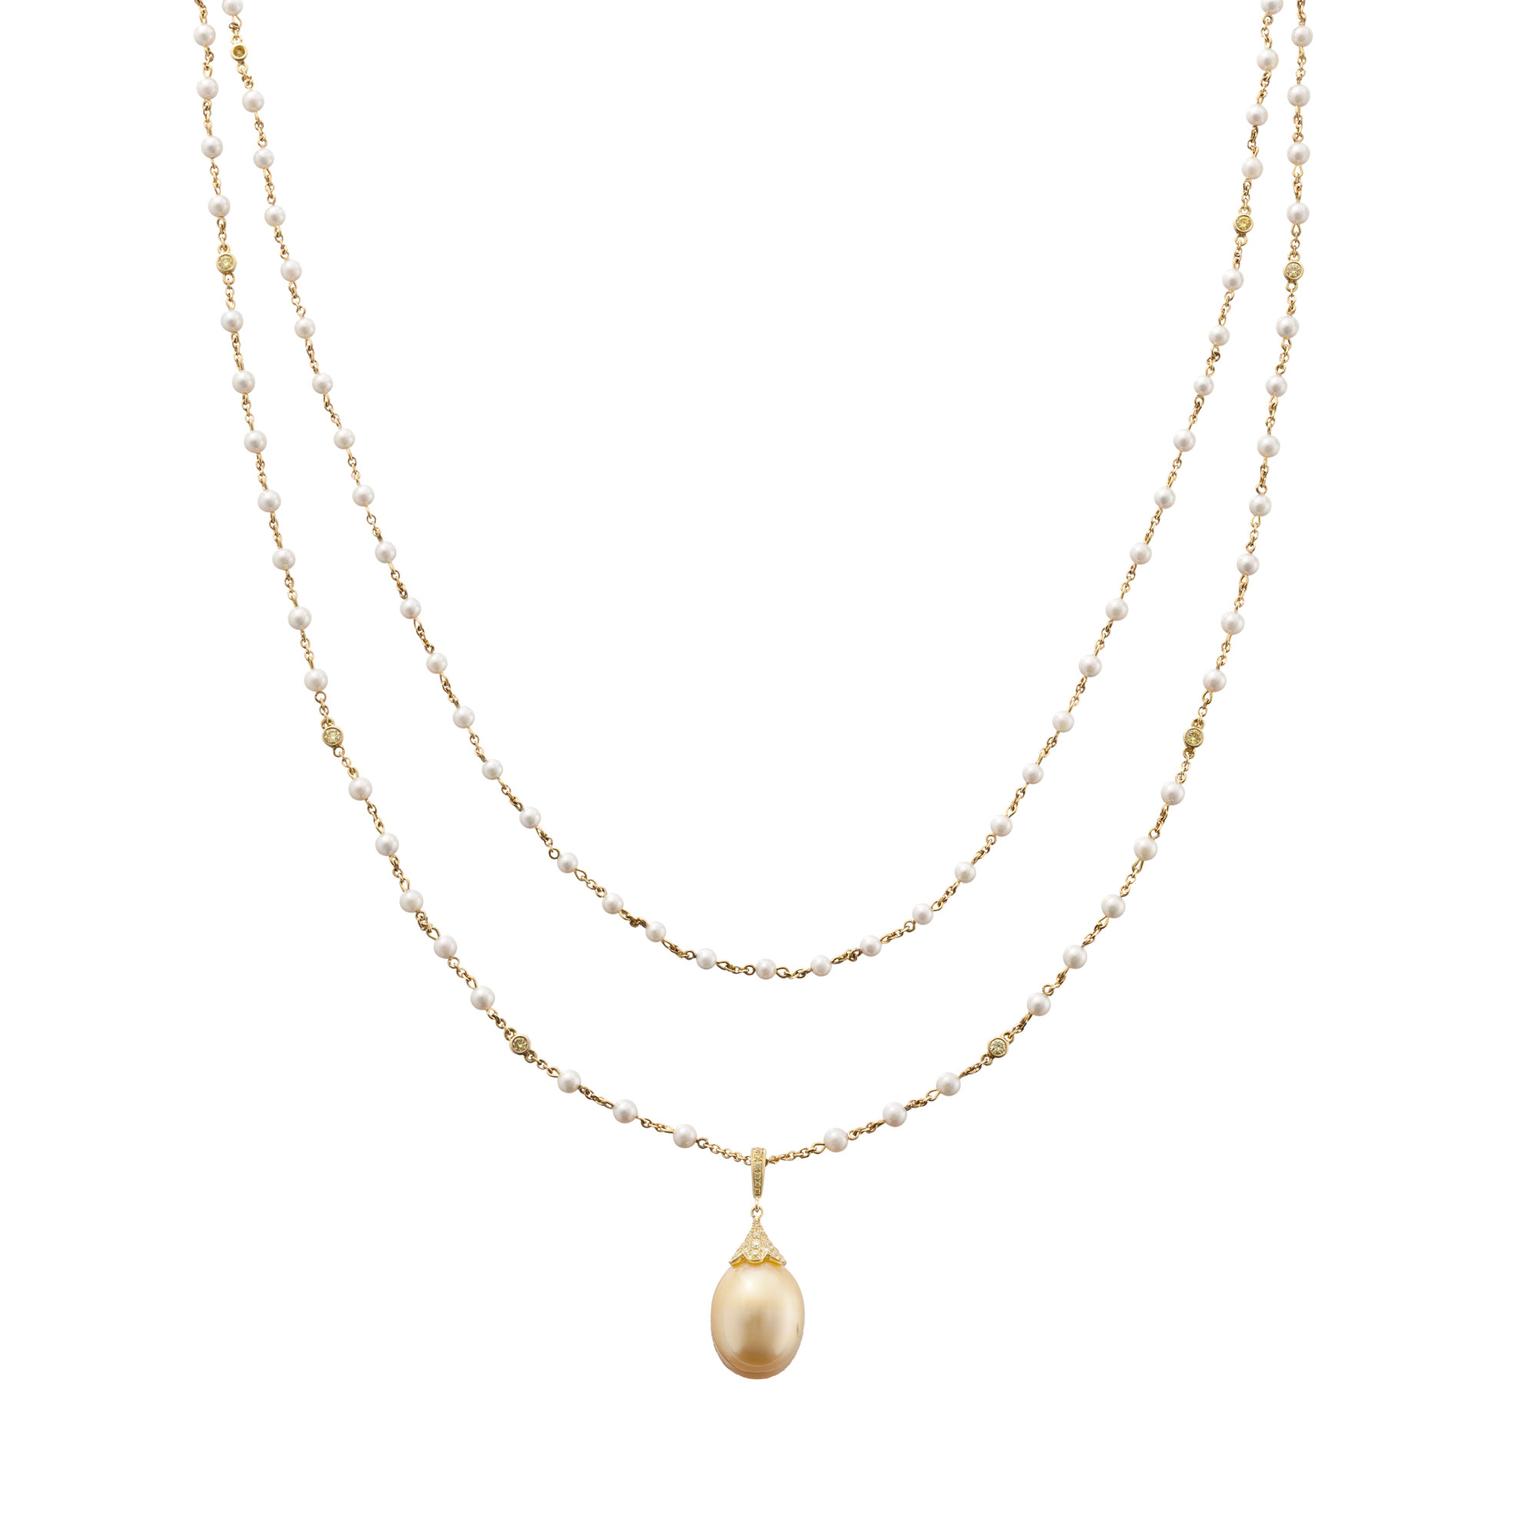 Boodles pearl necklace